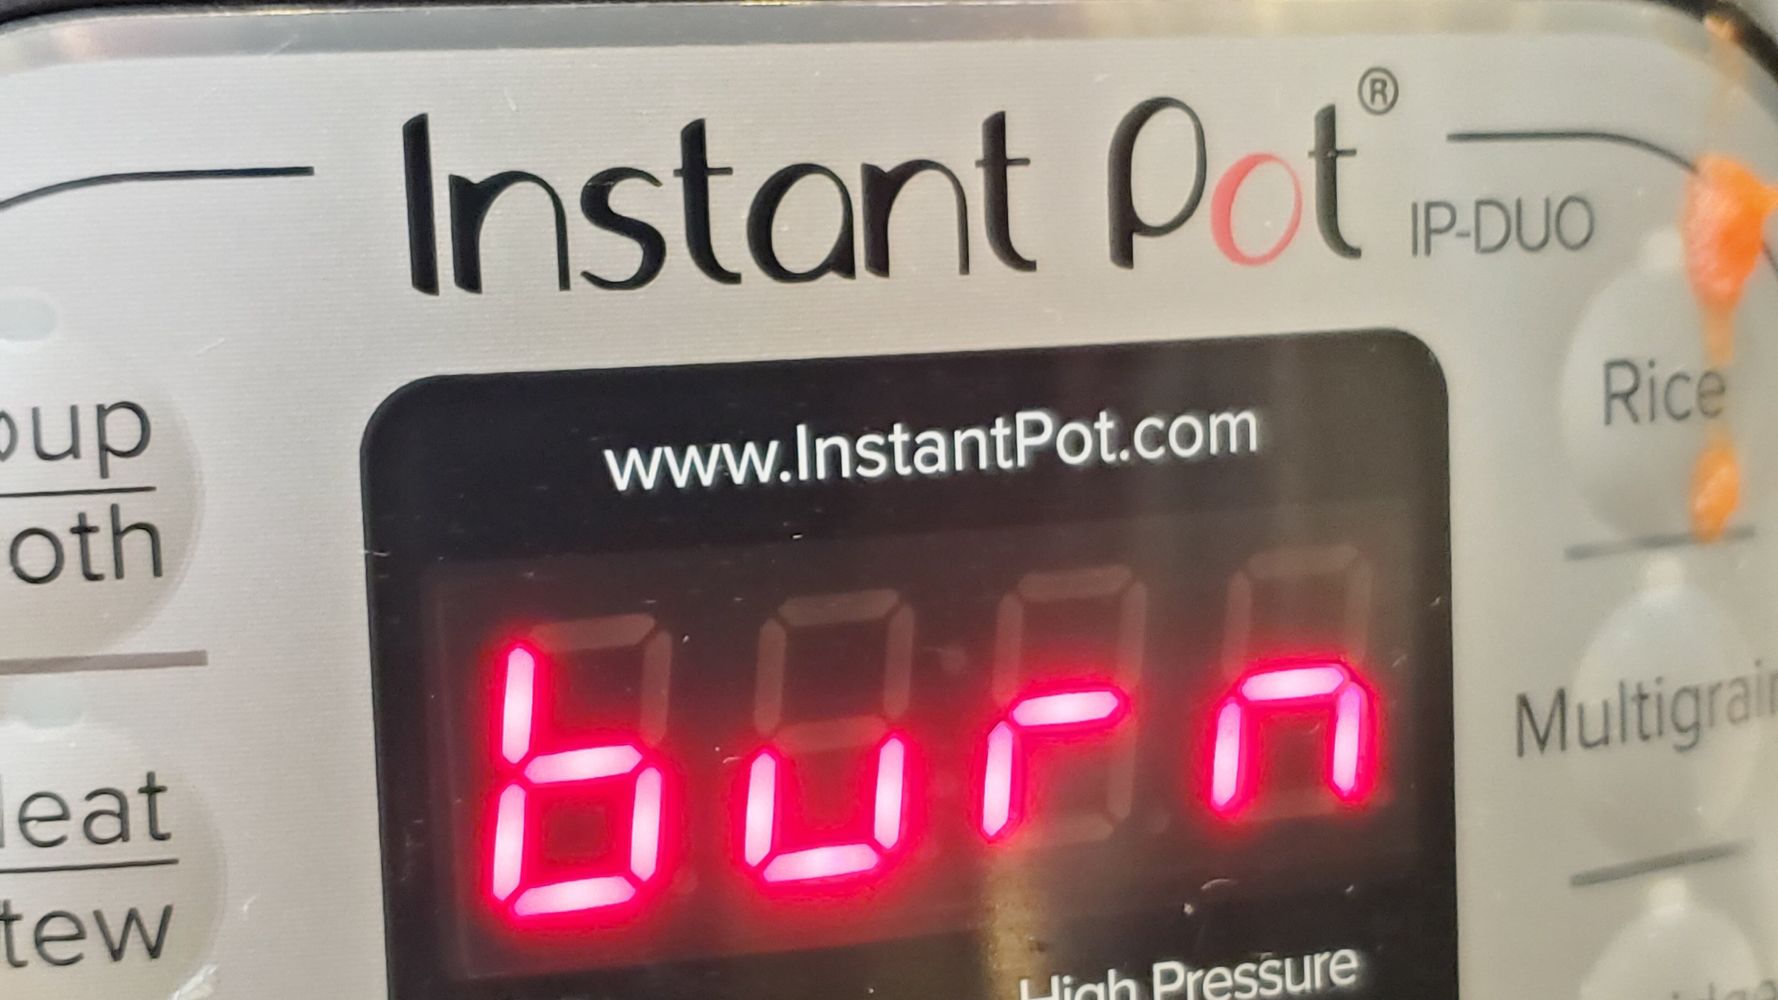 5 ways you're using your Instant Pot wrong - CNET